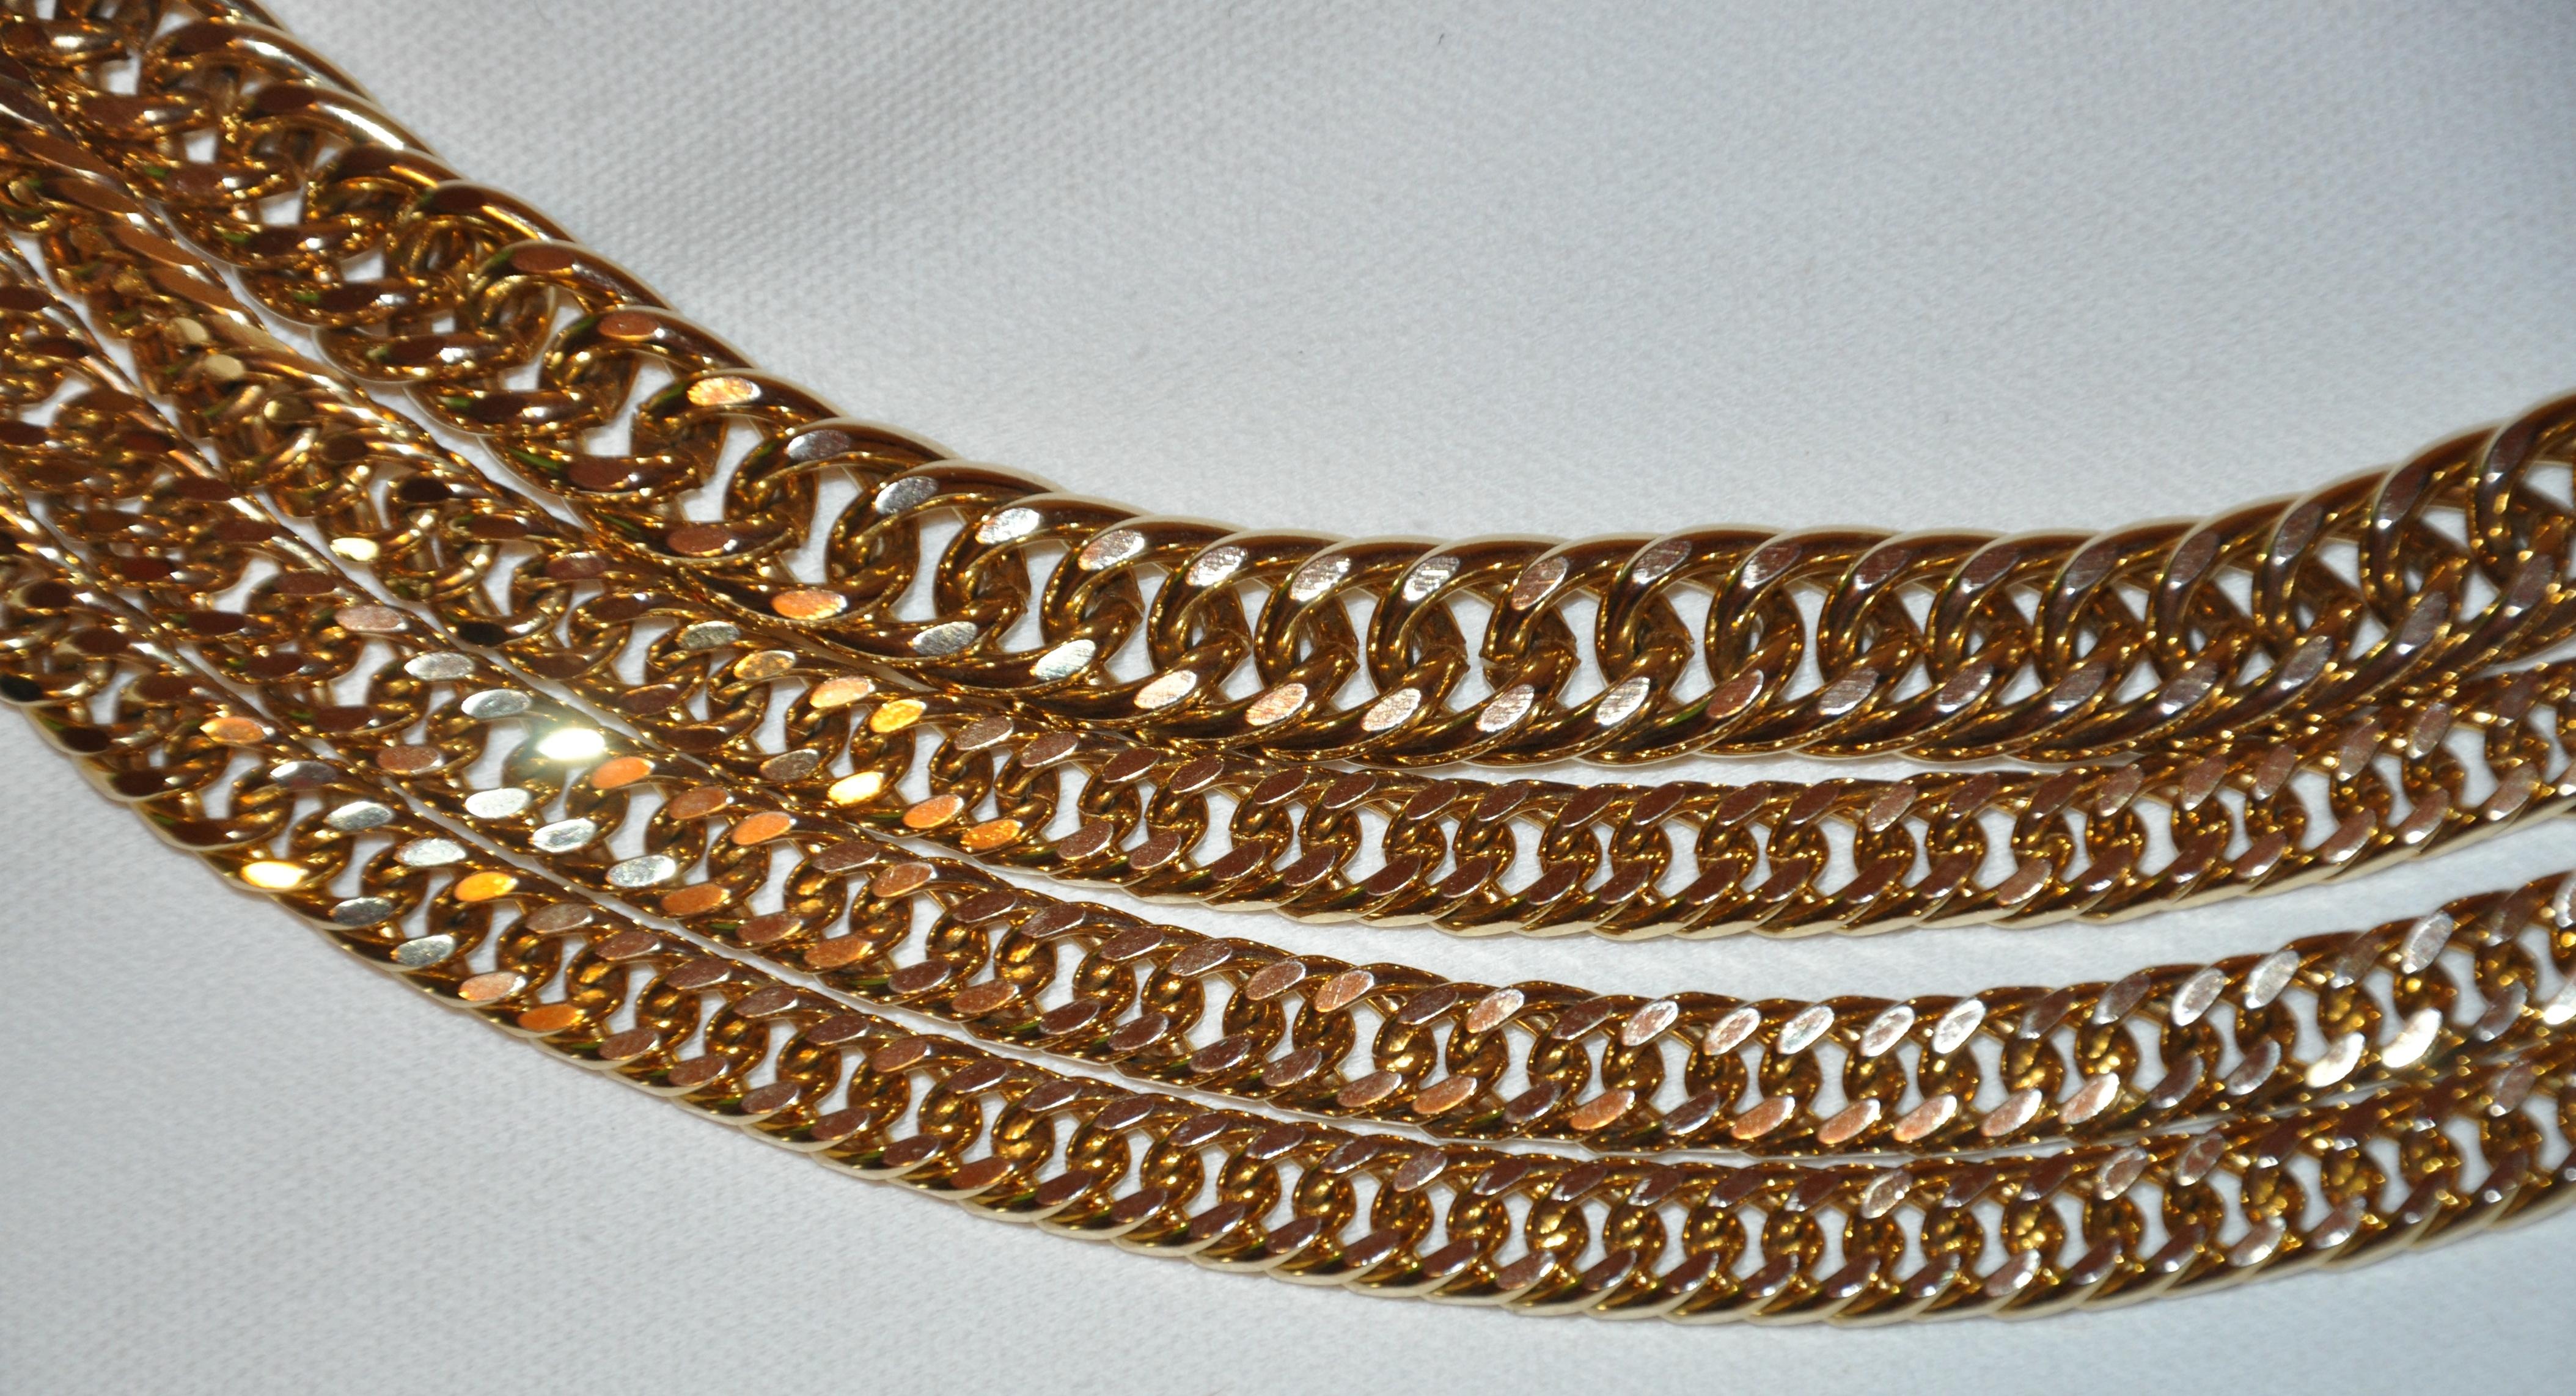        This wonderfully elegant and timeless thick polished gilded gold vermeil hardware adjustable chain belt, has 4-tiers of chain elegantly draping when worn. The w
